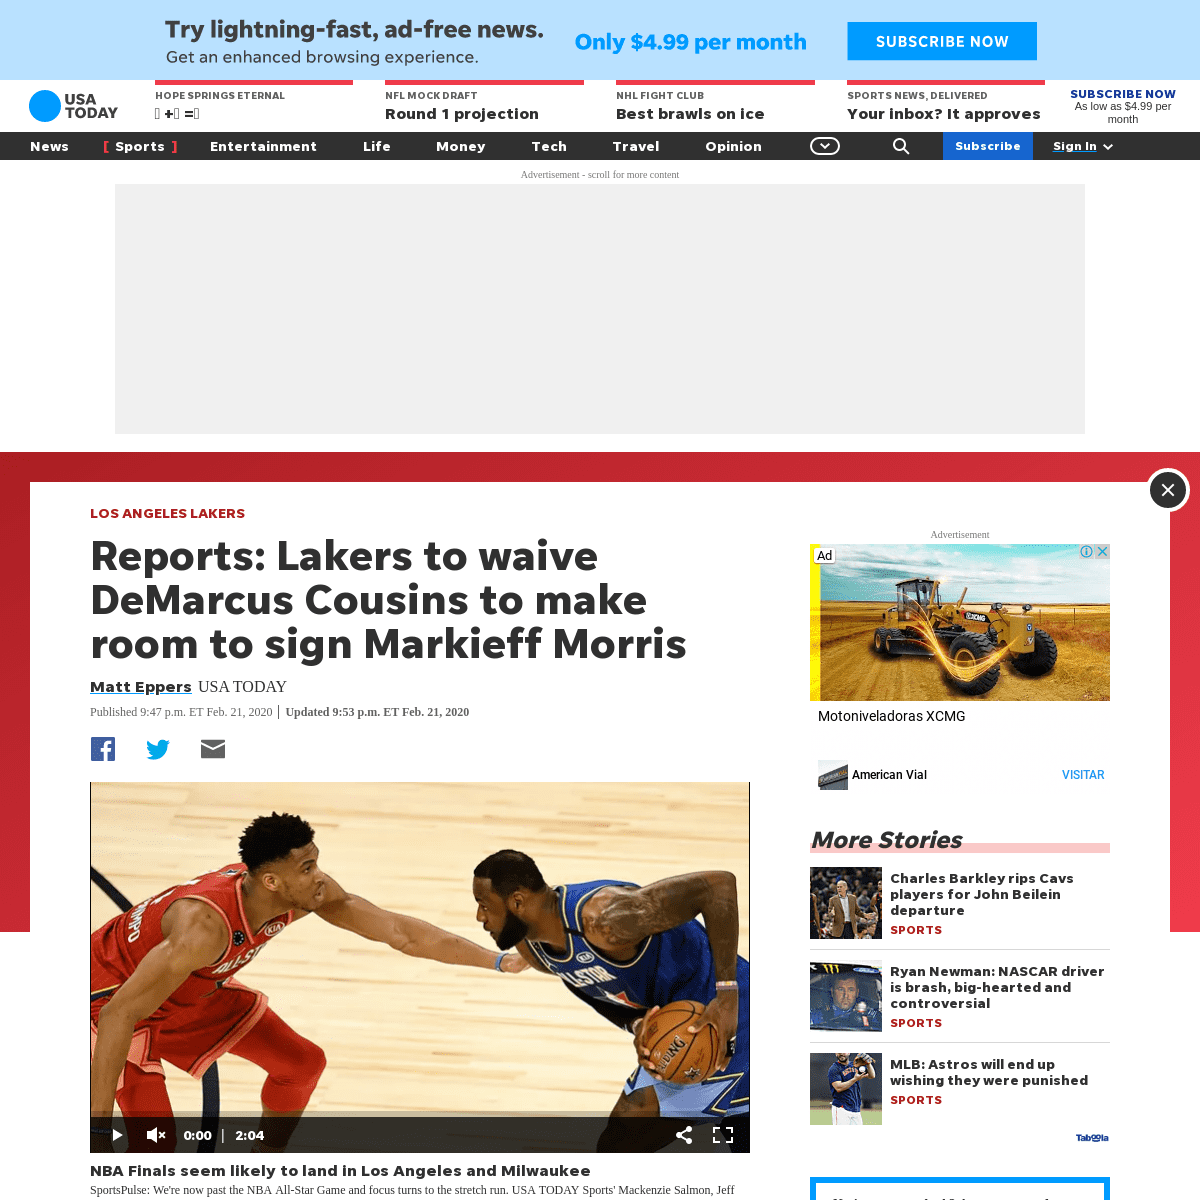 A complete backup of www.usatoday.com/story/sports/nba/lakers/2020/02/21/lakers-waive-demarcus-cousins-to-sign-markieff-morris/4